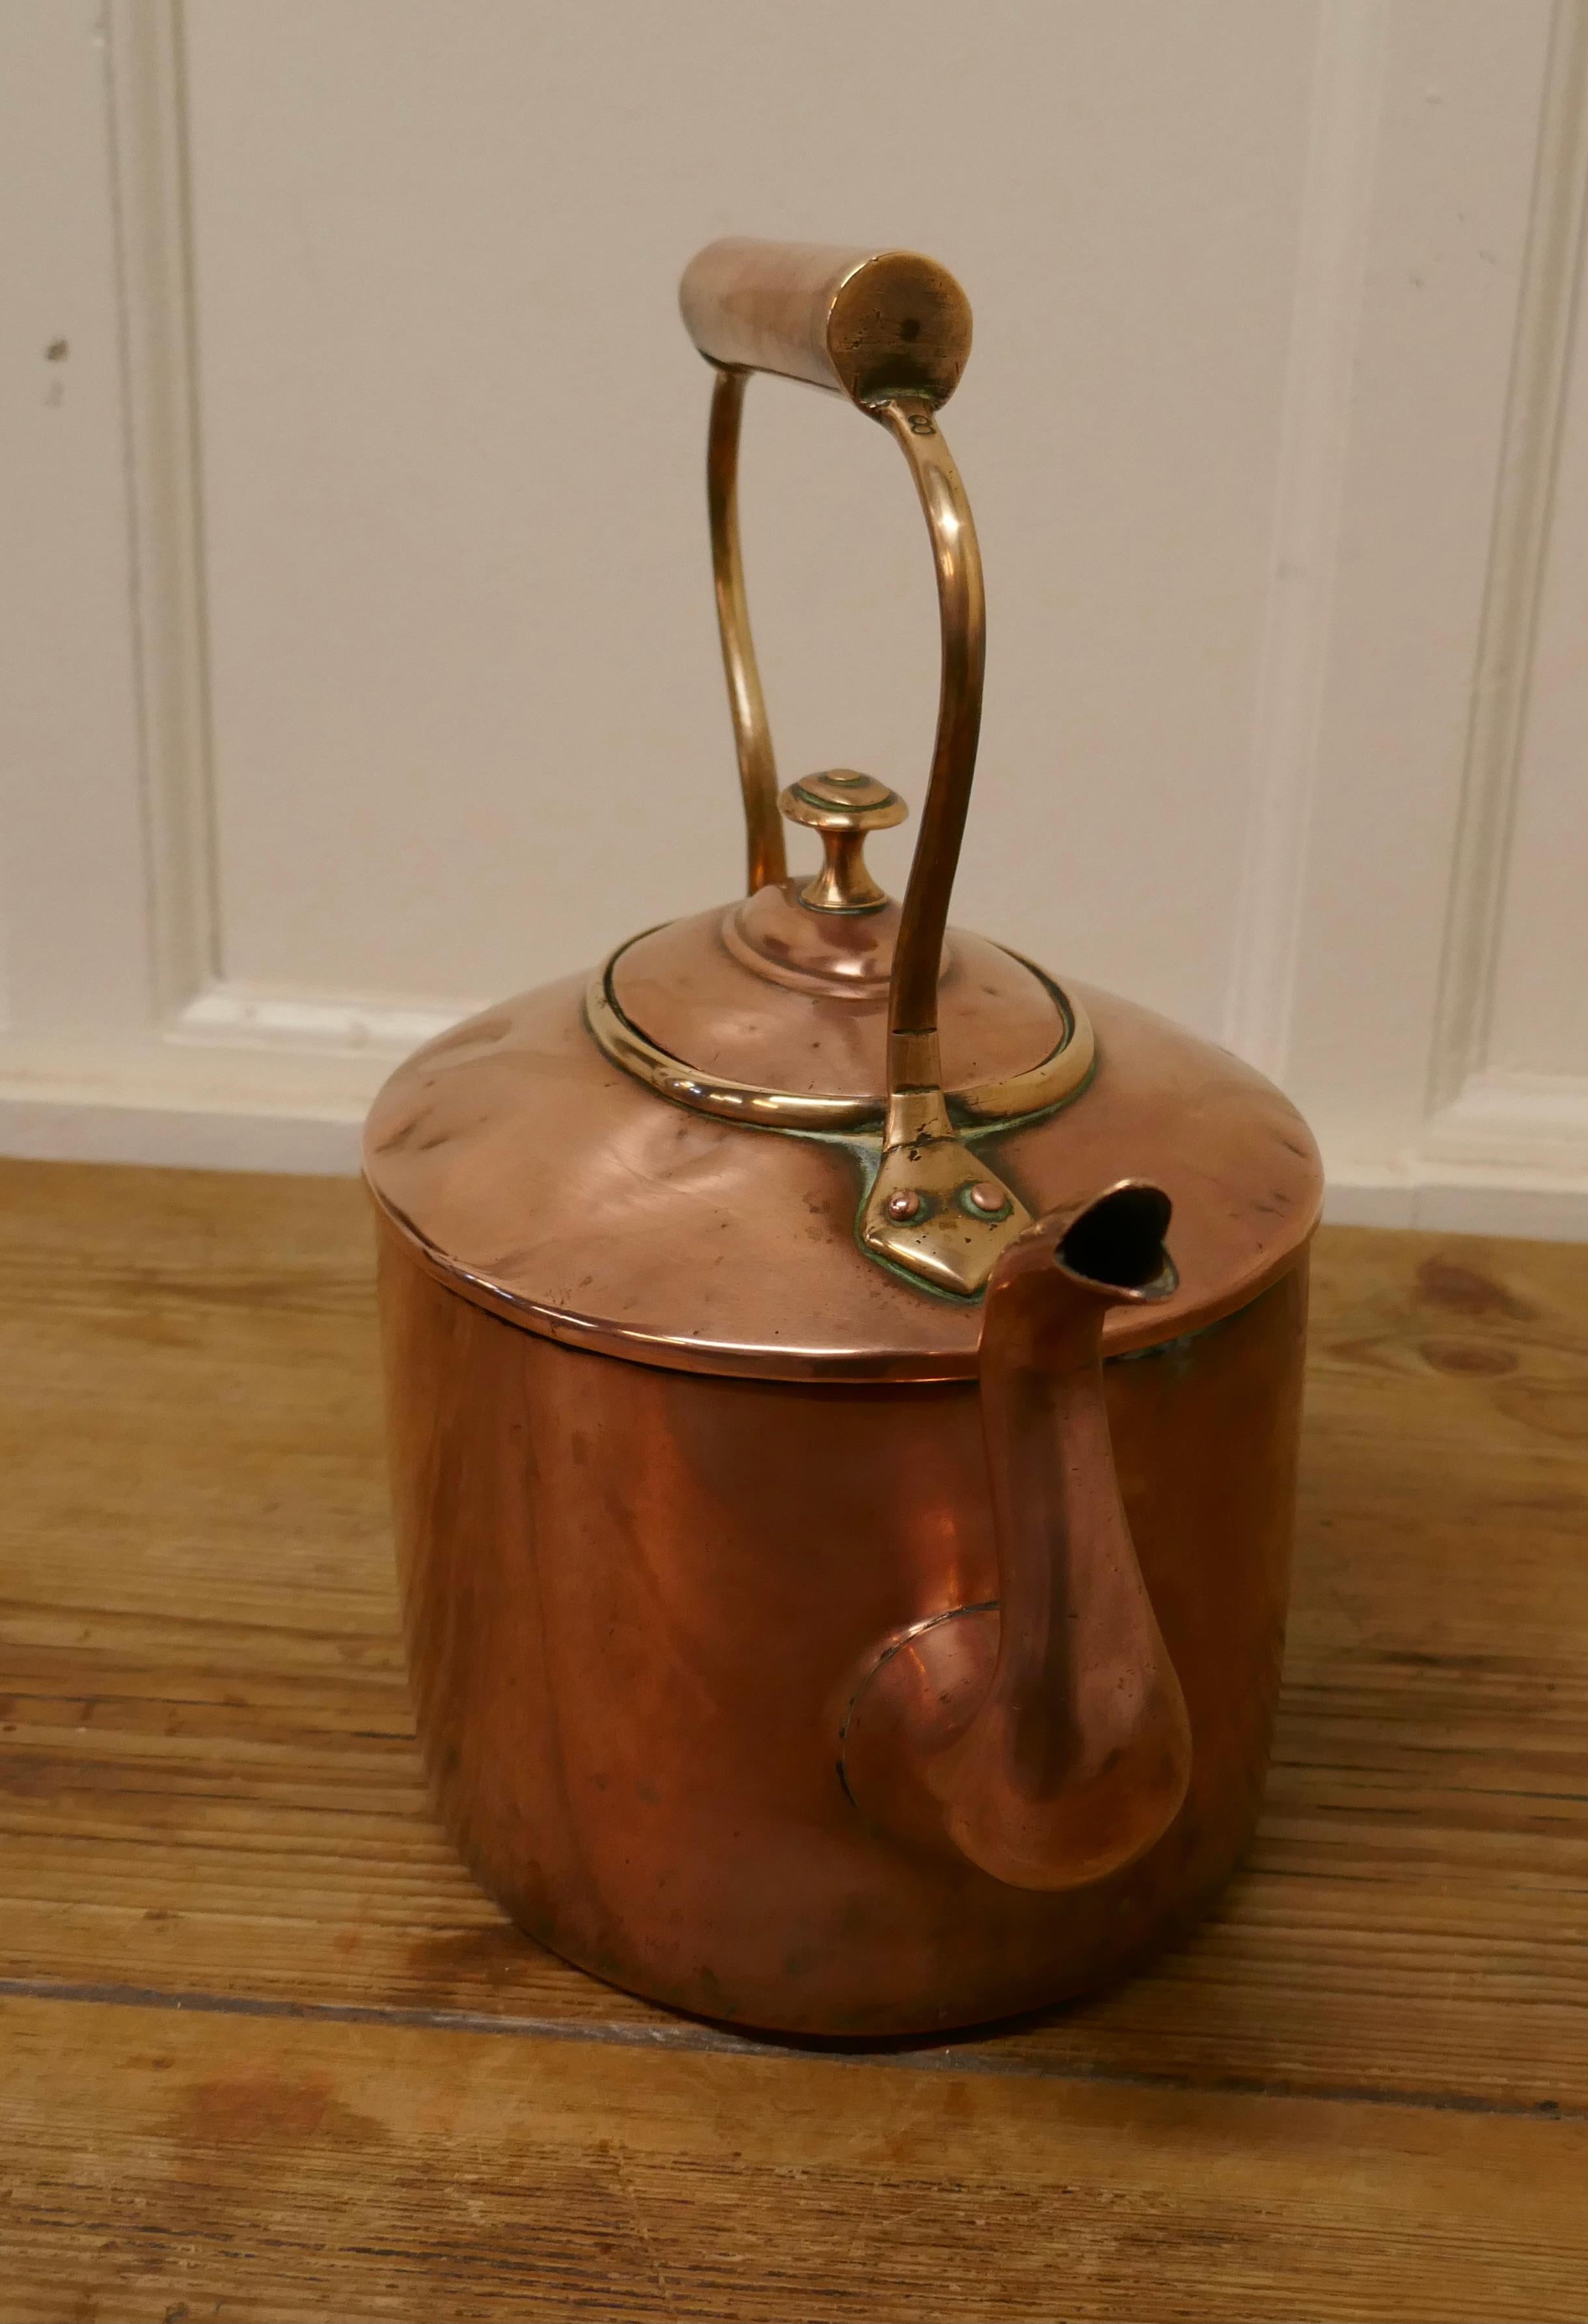 Charming 19th century oval century copper kettle

A lovely traditional piece, well used but solid and very attractive
The kettle is 13” high, 12” long and 7” wide
GB324.